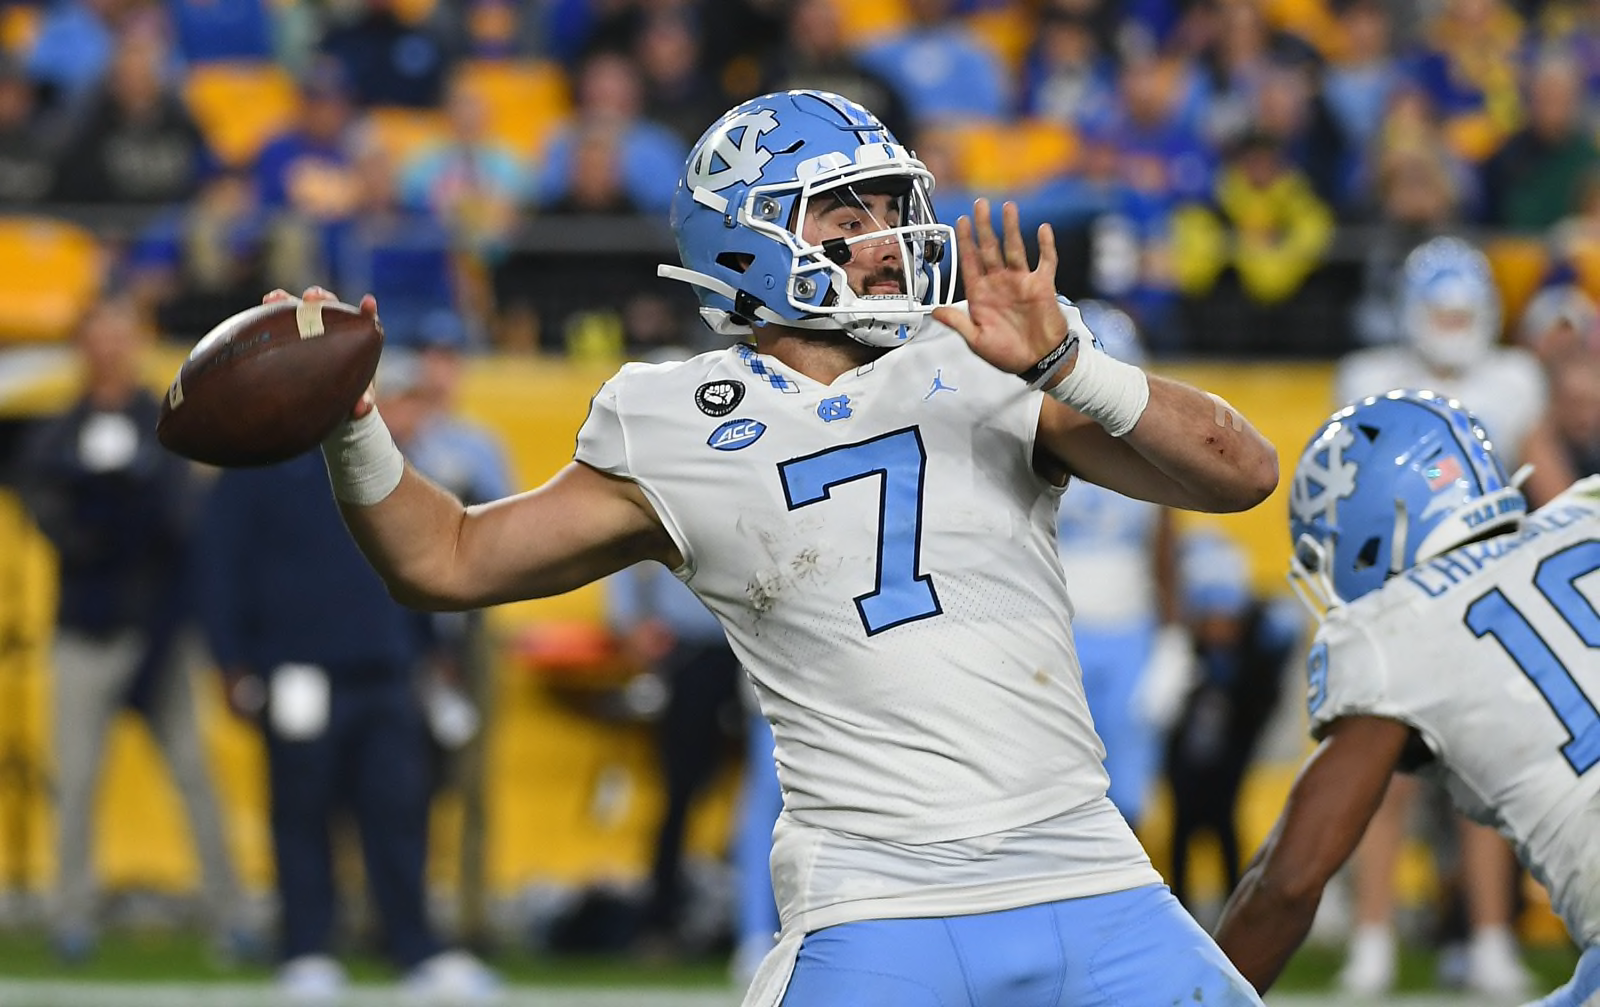 PITTSBURGH, PA - NOVEMBER 11: Sam Howell #7 of the North Carolina Tar Heels throws a 76-yard touchdown pass in the second quarter against the Pittsburgh Panthers at Heinz Field on November 11, 2021 in Pittsburgh, Pennsylvania. (Photo by Justin Berl/Getty Images)